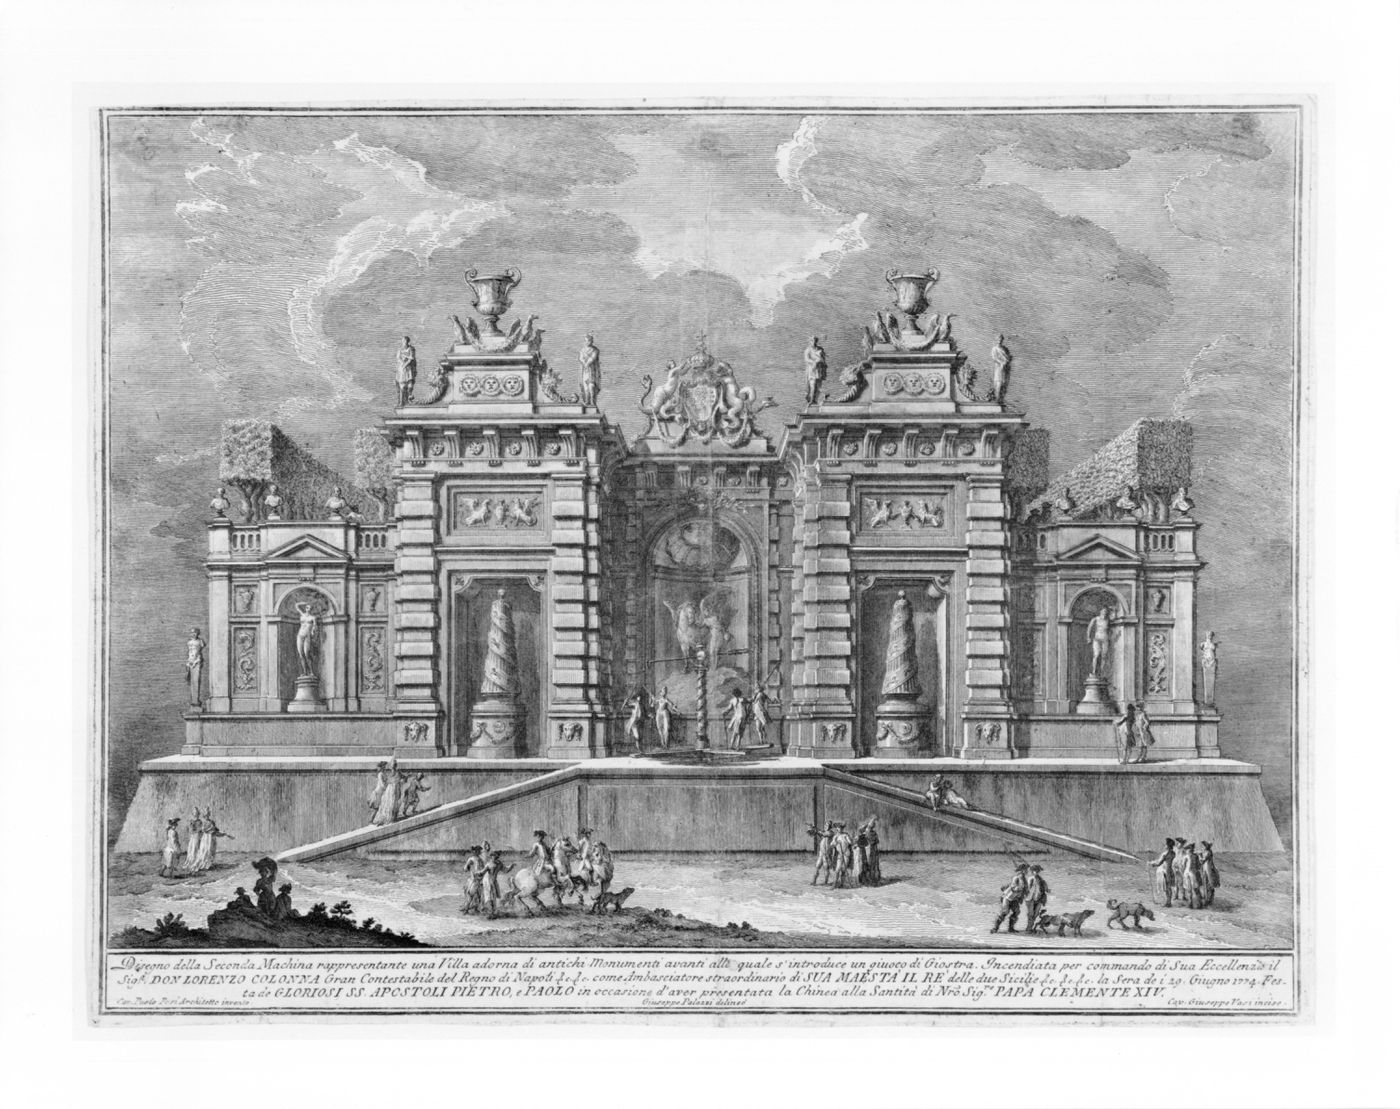 Etching of Posi's design for the "seconda macchina" of 1774